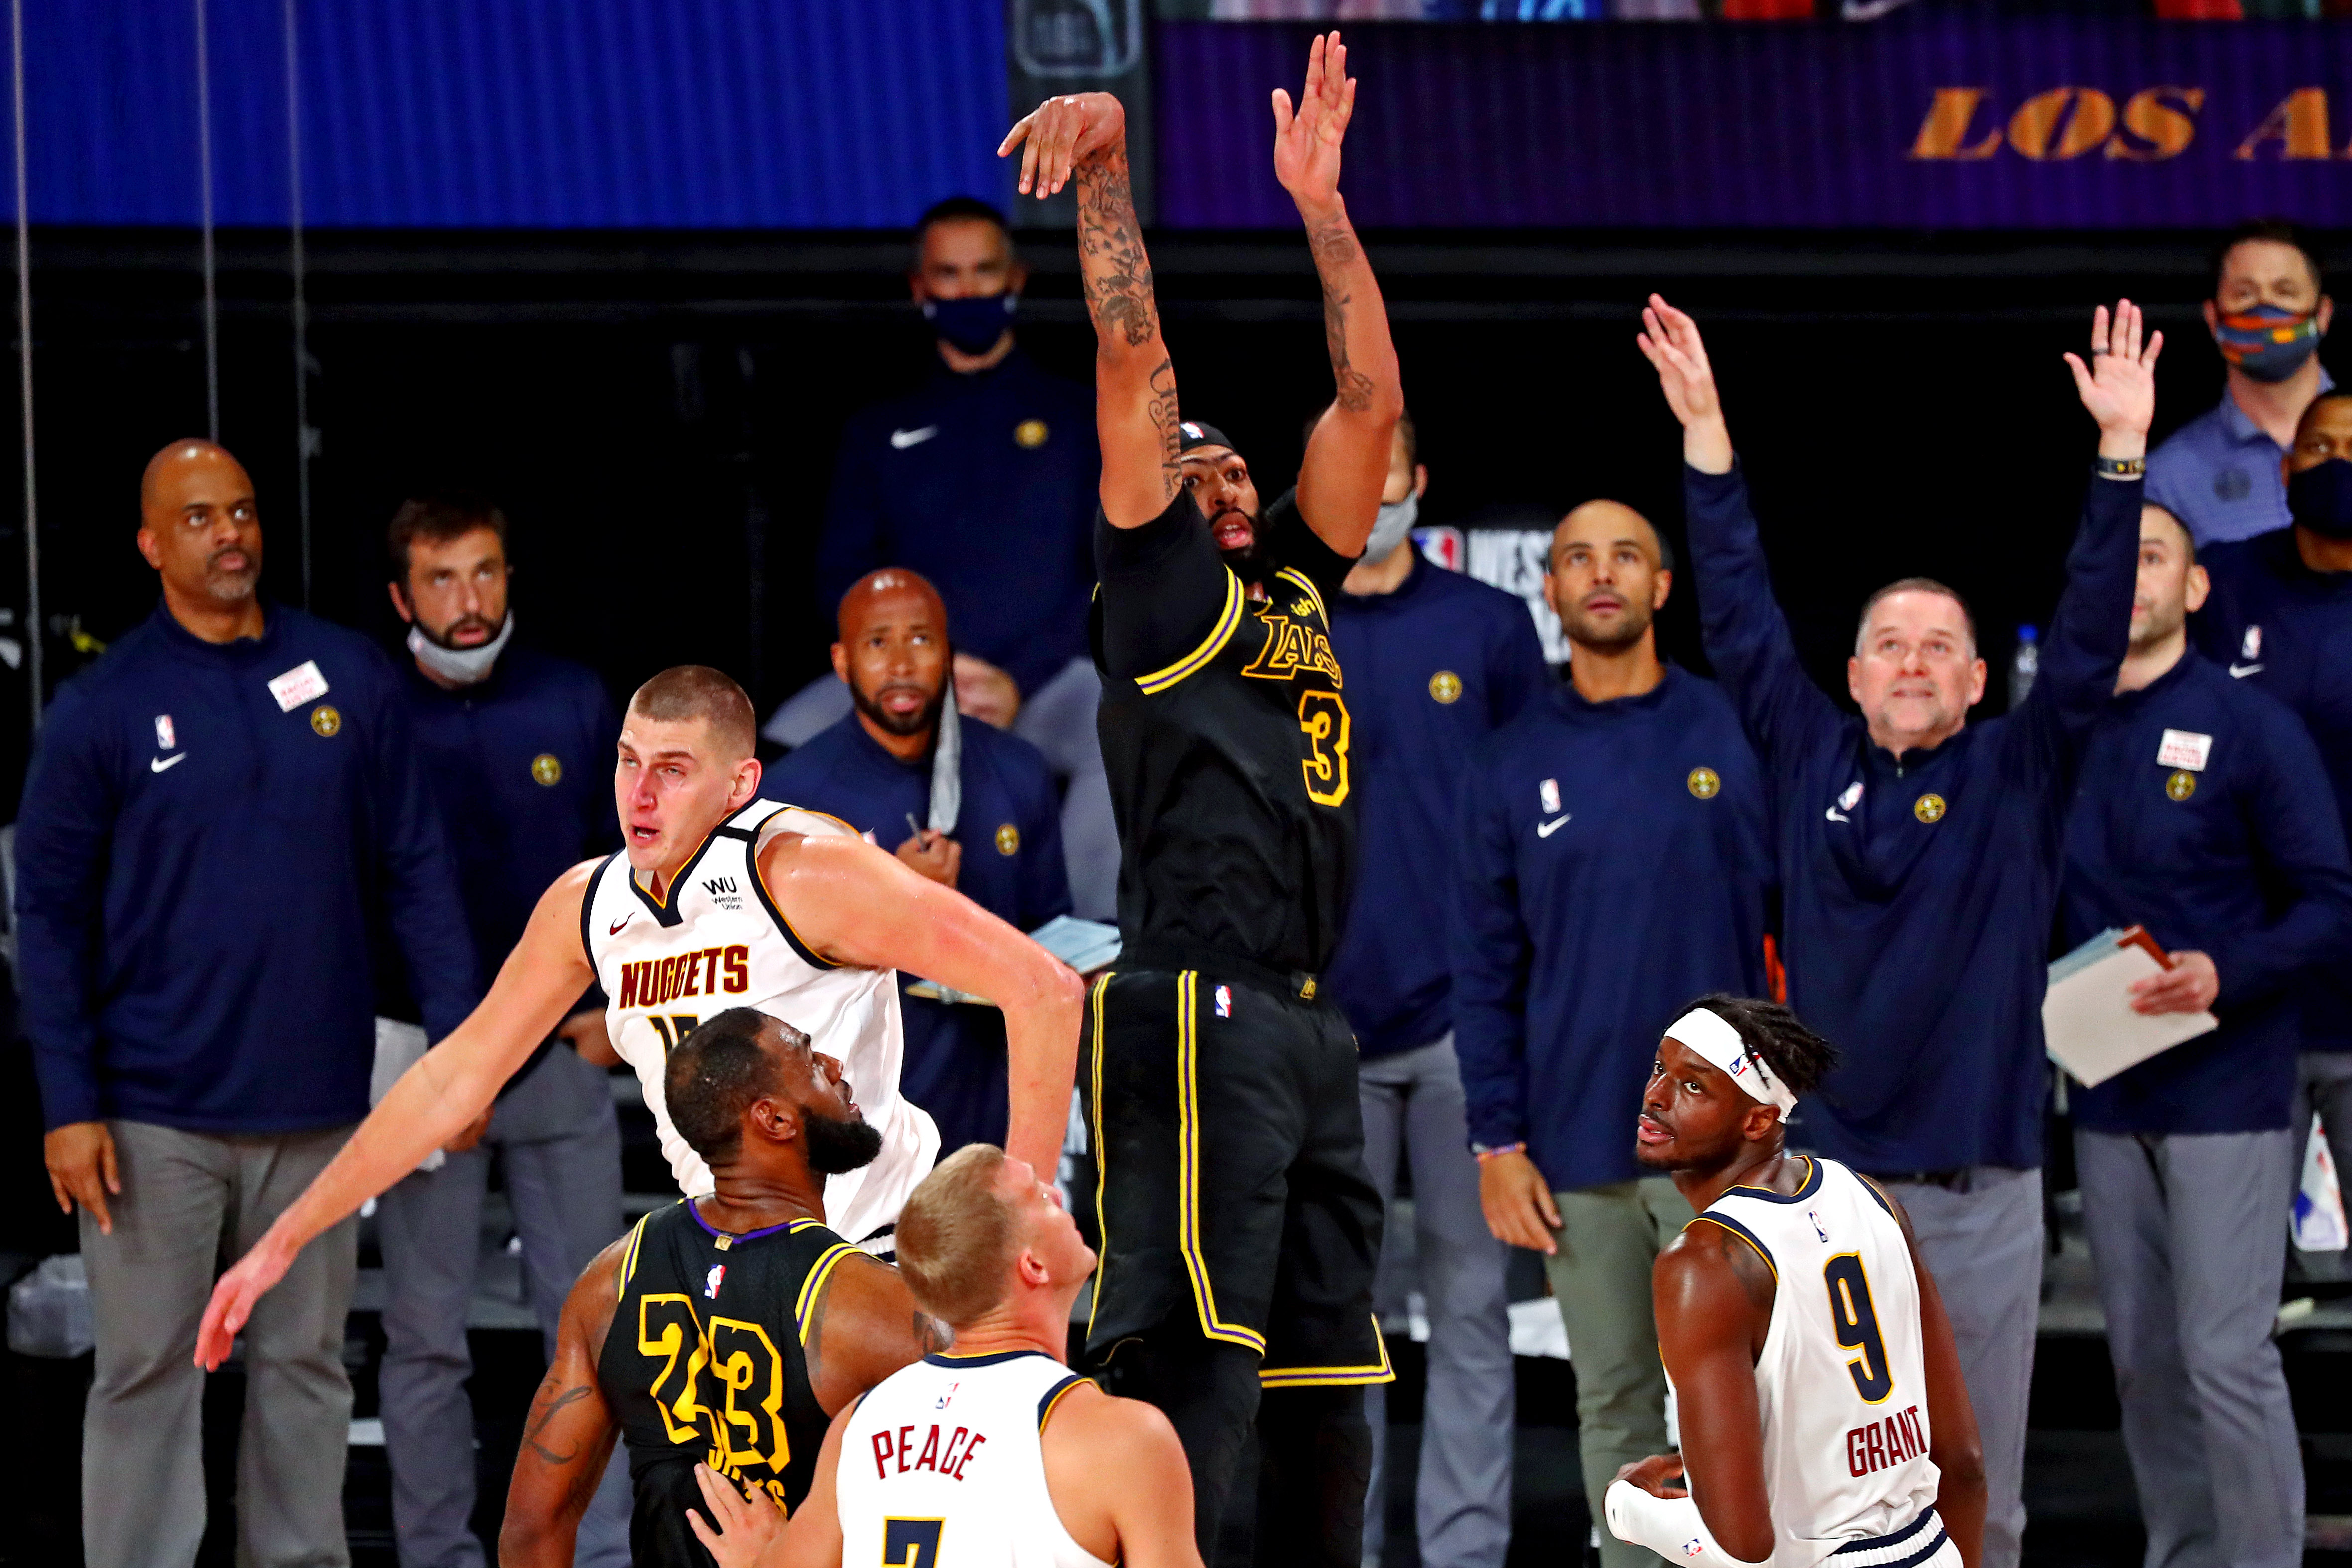 Los Angeles Lakers forward Anthony Davis (3) makes the game winning basket against Denver Nuggets center Nikola Jokic (15) during the fourth quarter in game two of the Western Conference Finals of the 2020 NBA Playoffs at AdventHealth Arena.